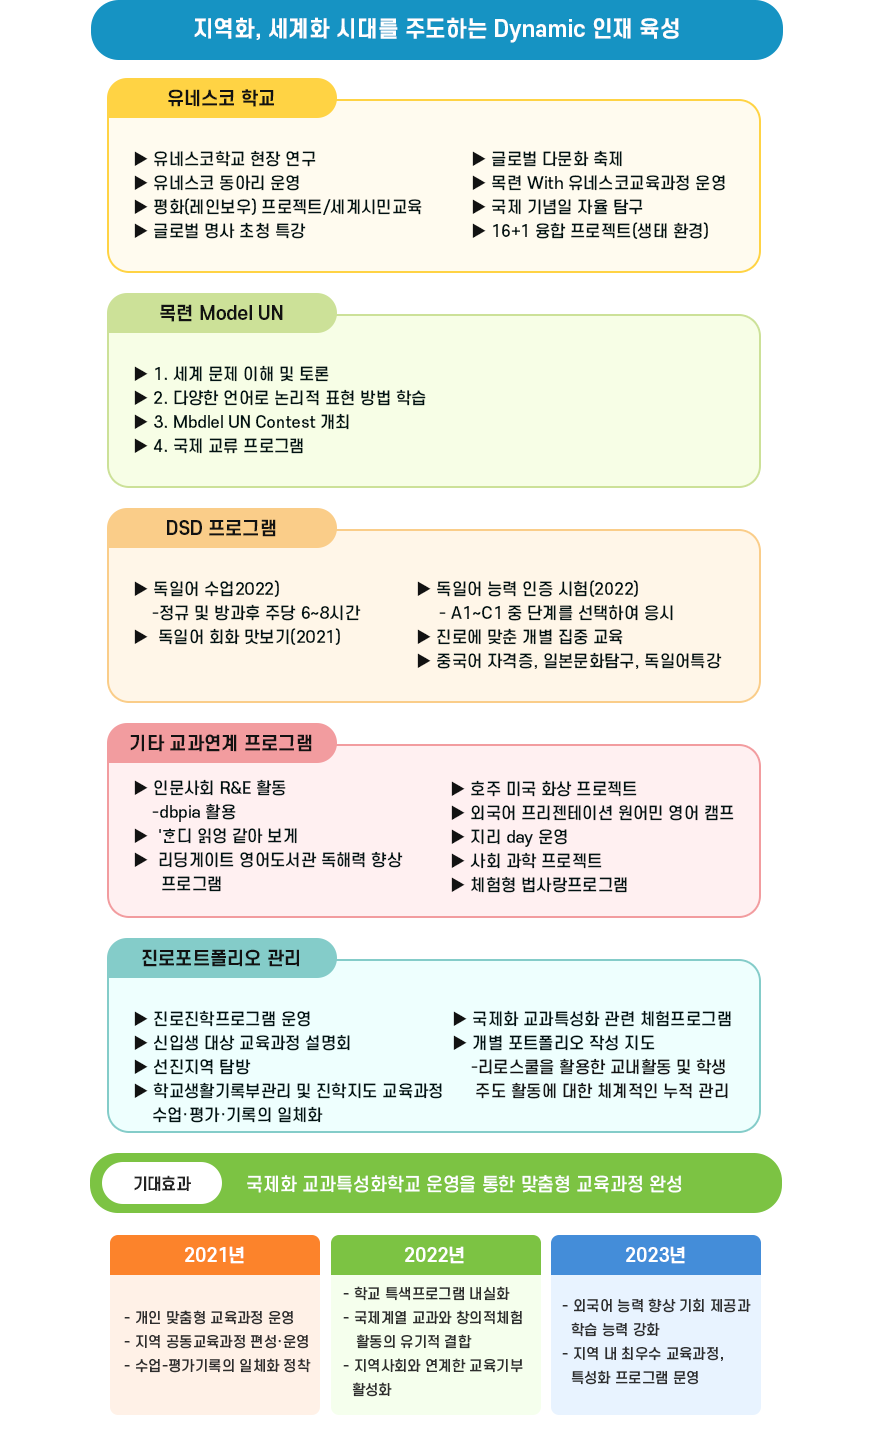 Step-three Educational Goals and policy 이미지